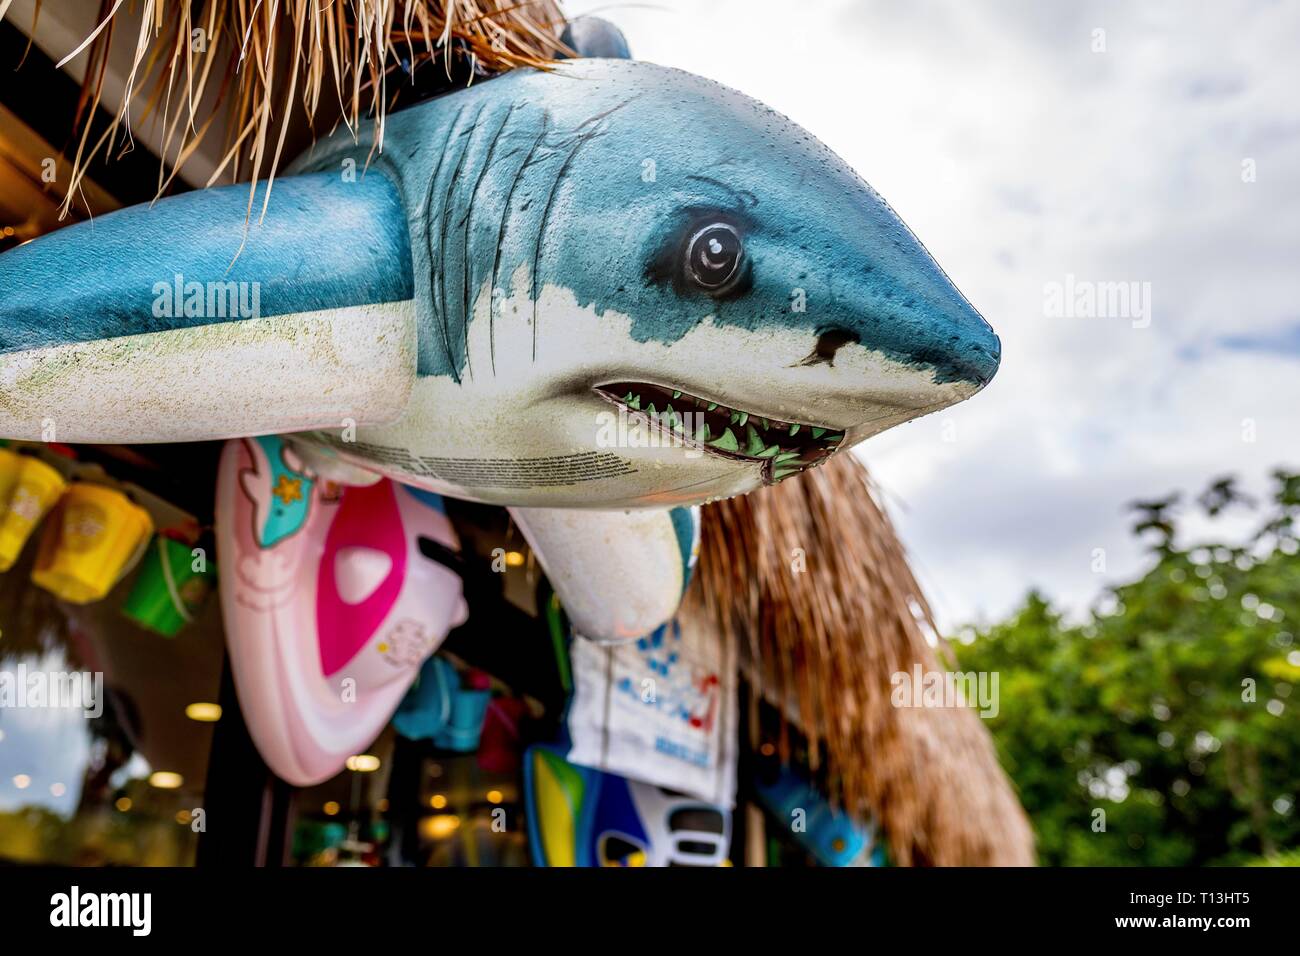 Bright and colourful great white shark inflatable toys outside a souvenir shop in a beach resort in the caribbean area of the Riviera Maya in Mexico. Stock Photo